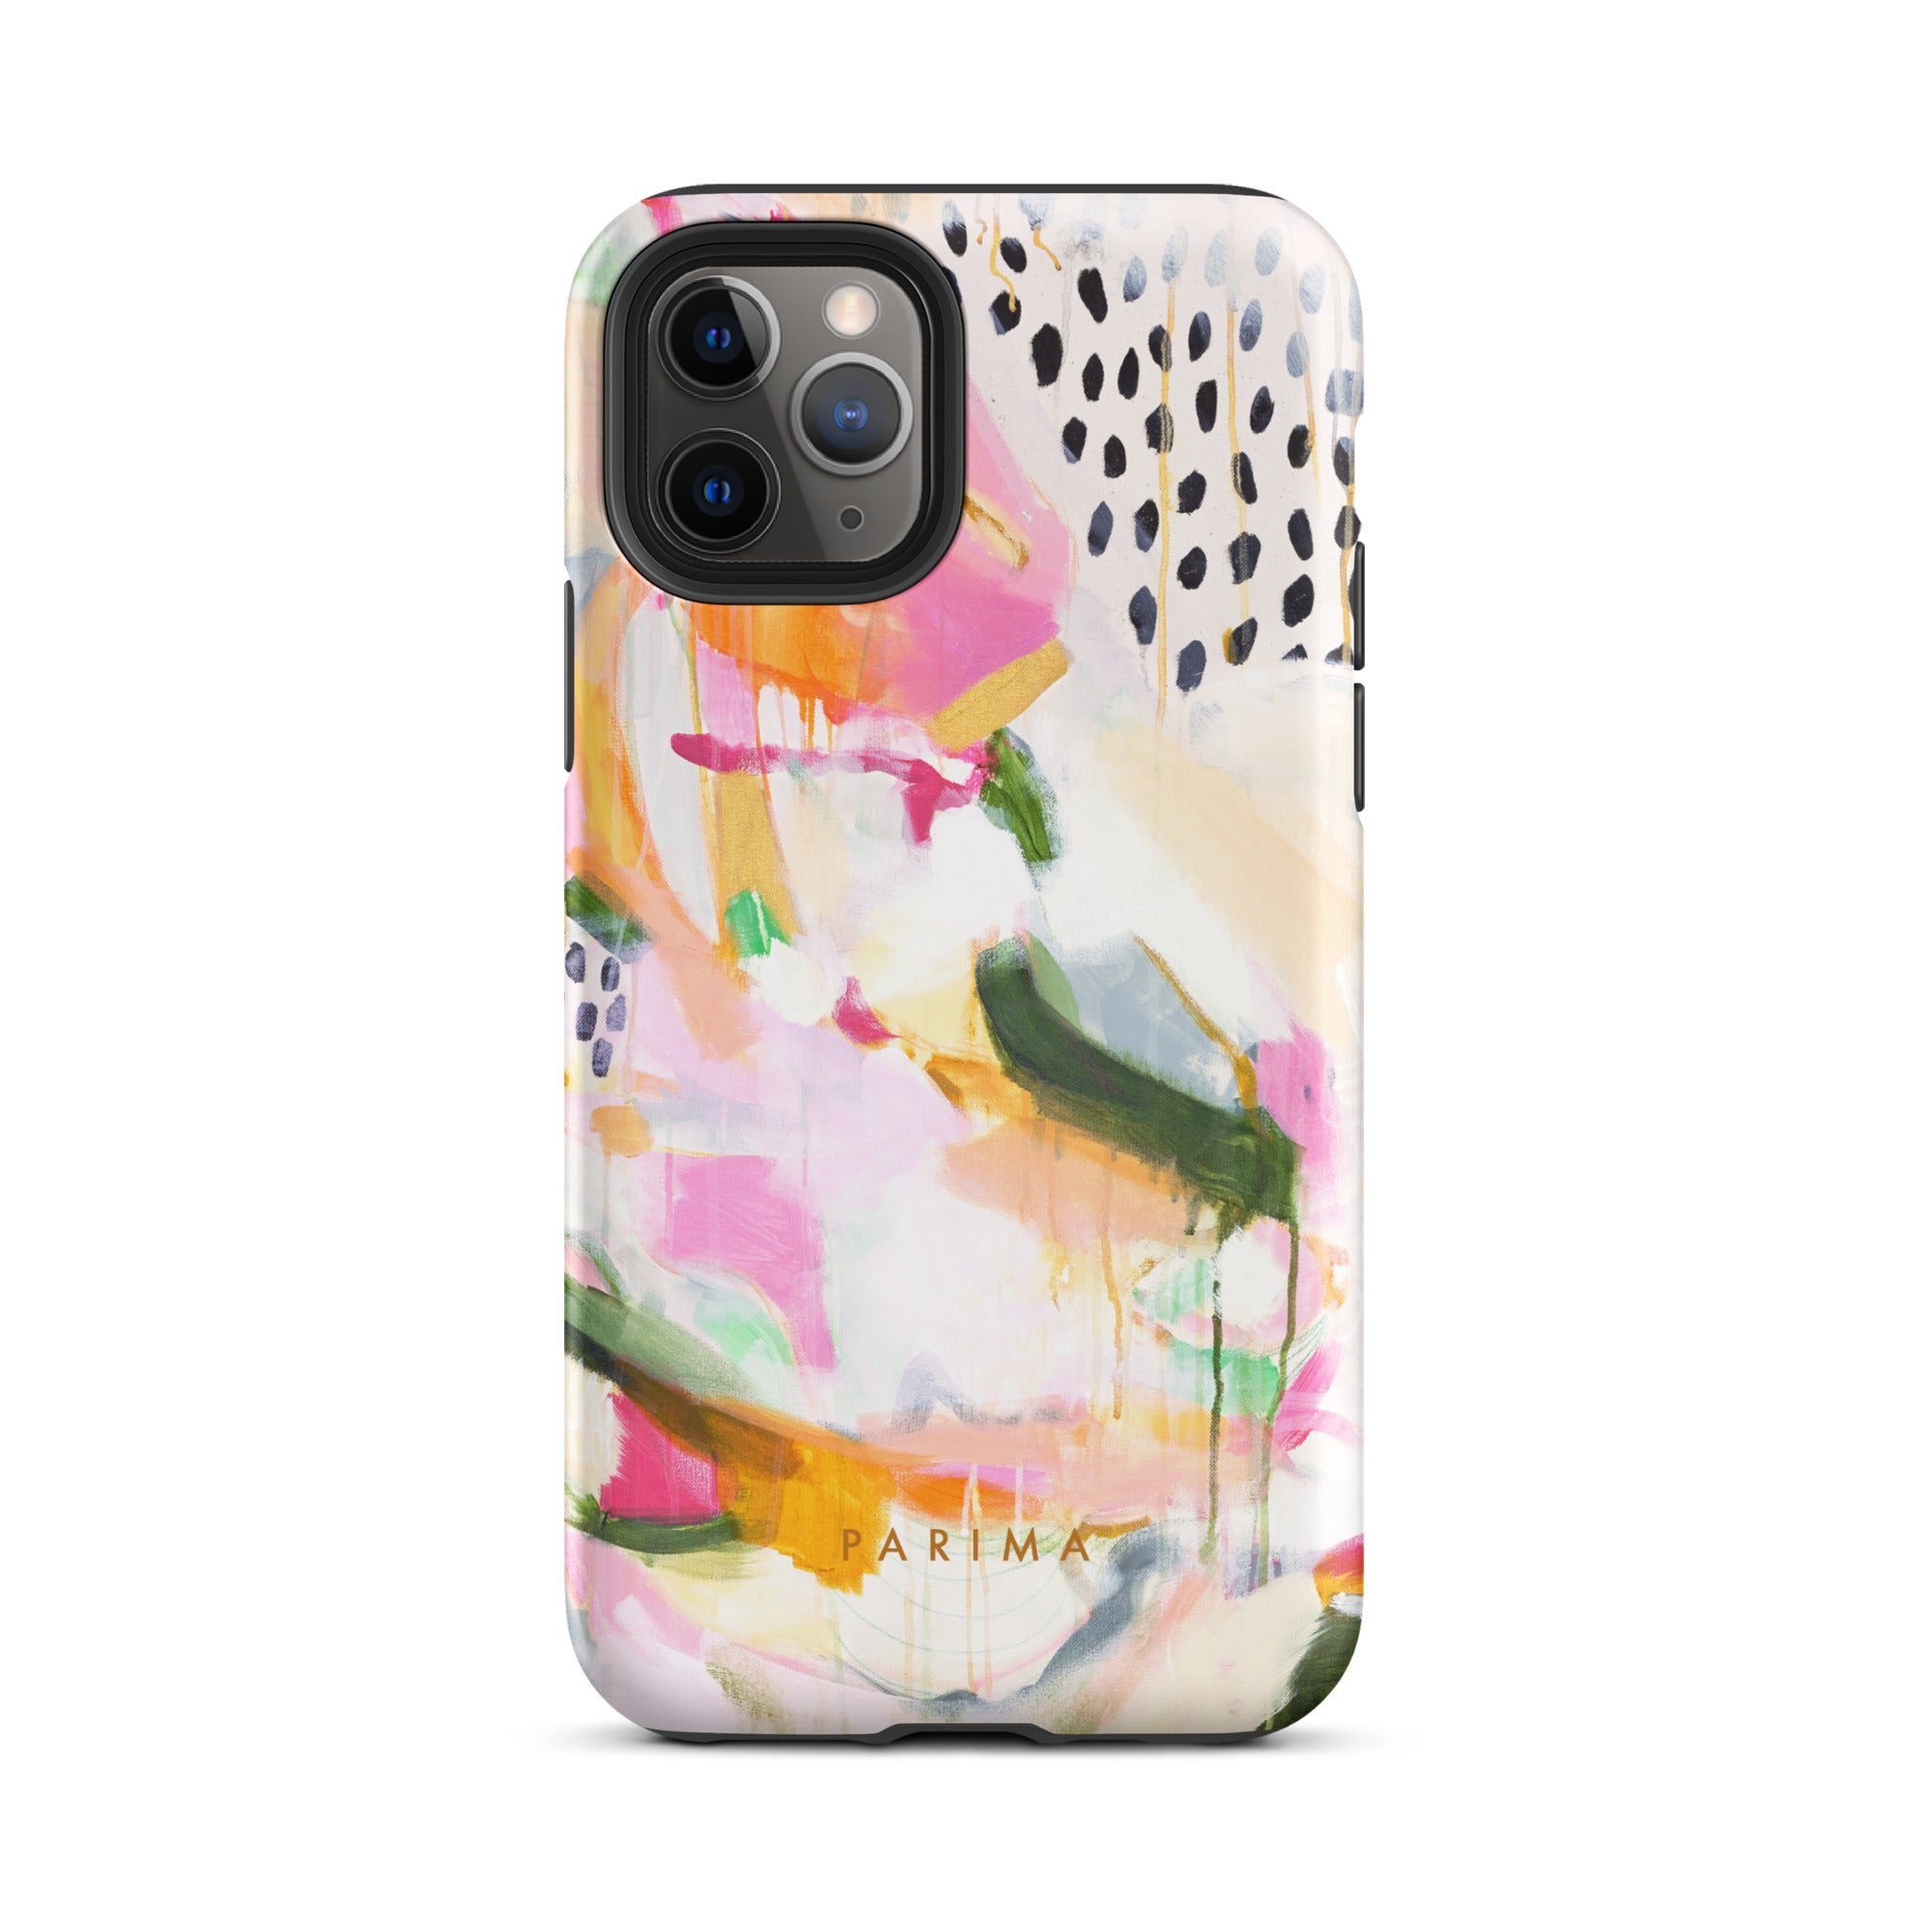 Adira, pink and green abstract art - iPhone 11 Pro tough case by Parima Studio